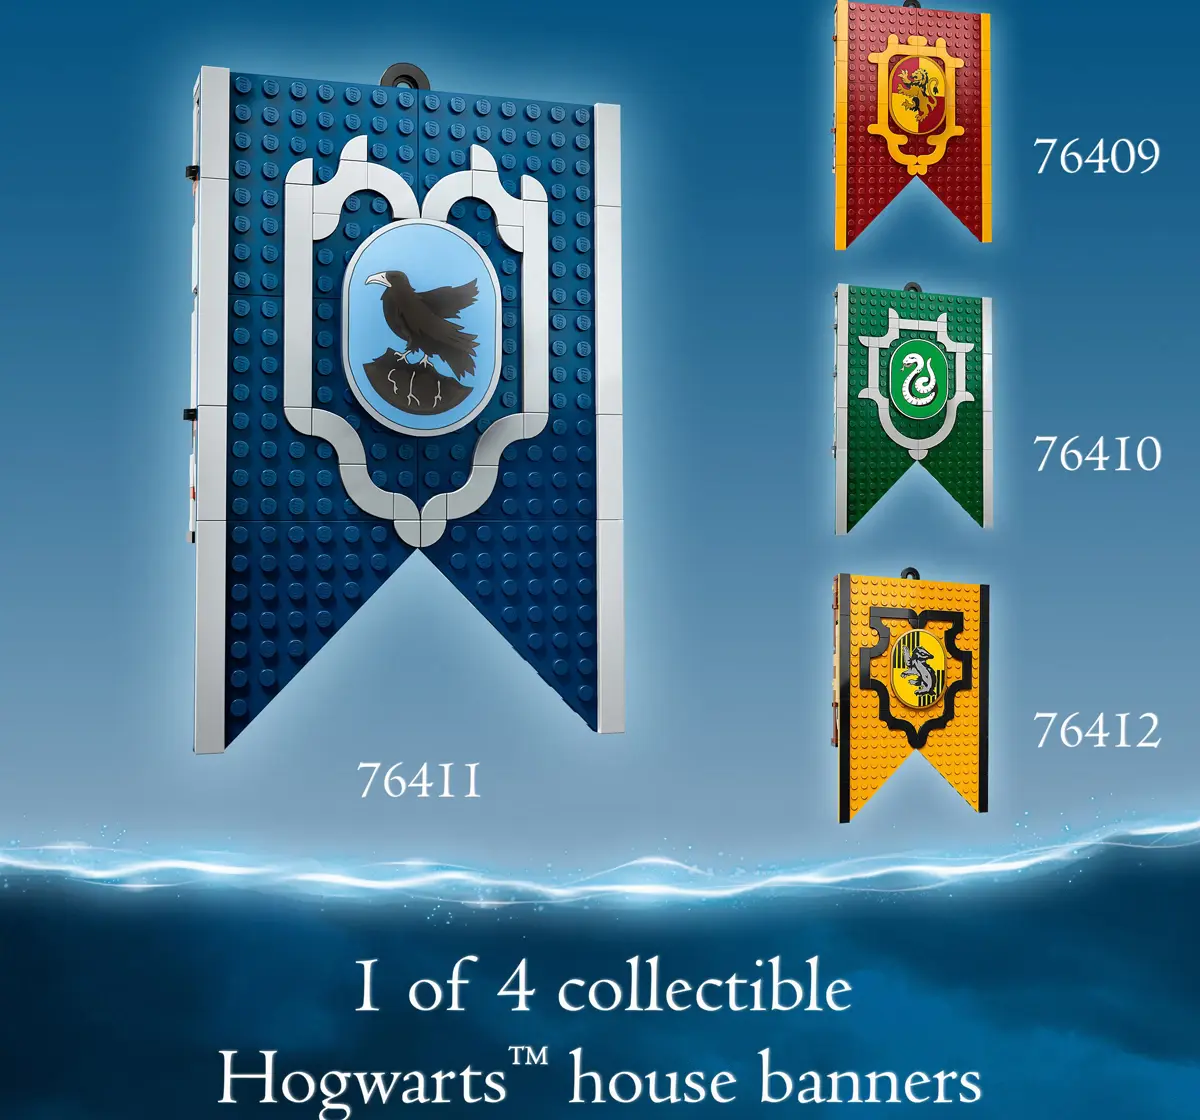 LEGO Harry Potter Ravenclaw House Banner 76411 Building Toy Set, 9Y+, 305 Pieces